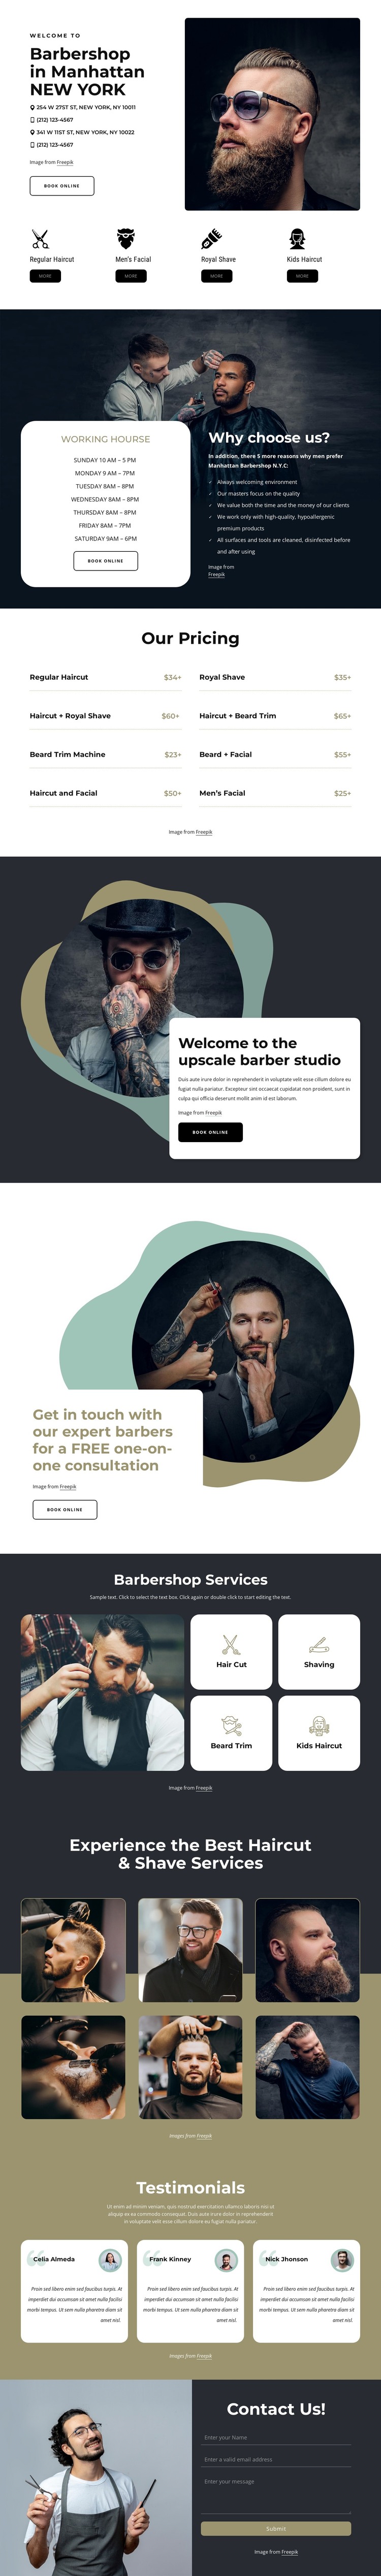 Hight quality grooming services Web Design